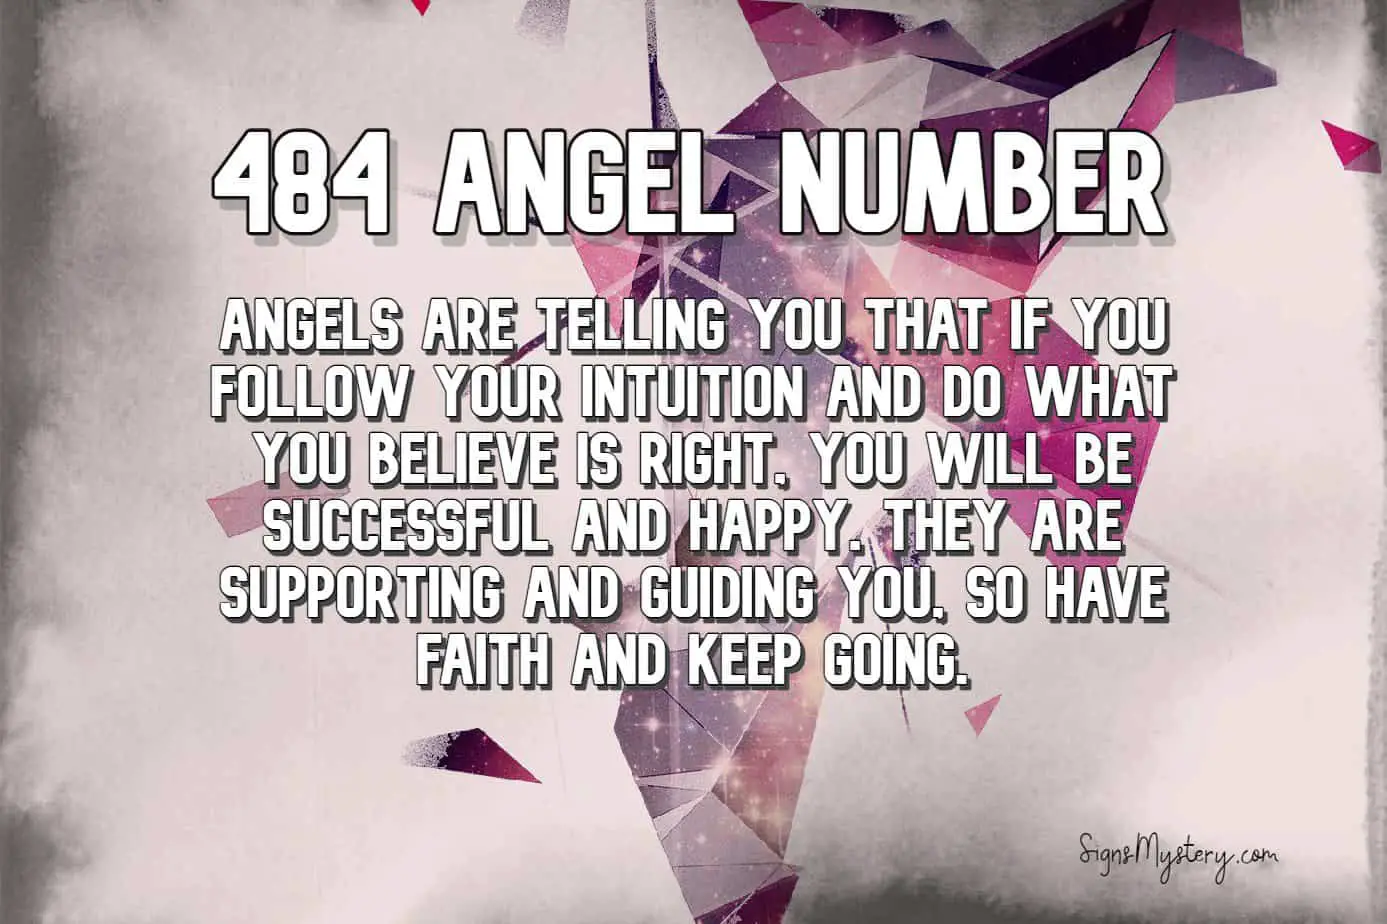 484 angel number meaning